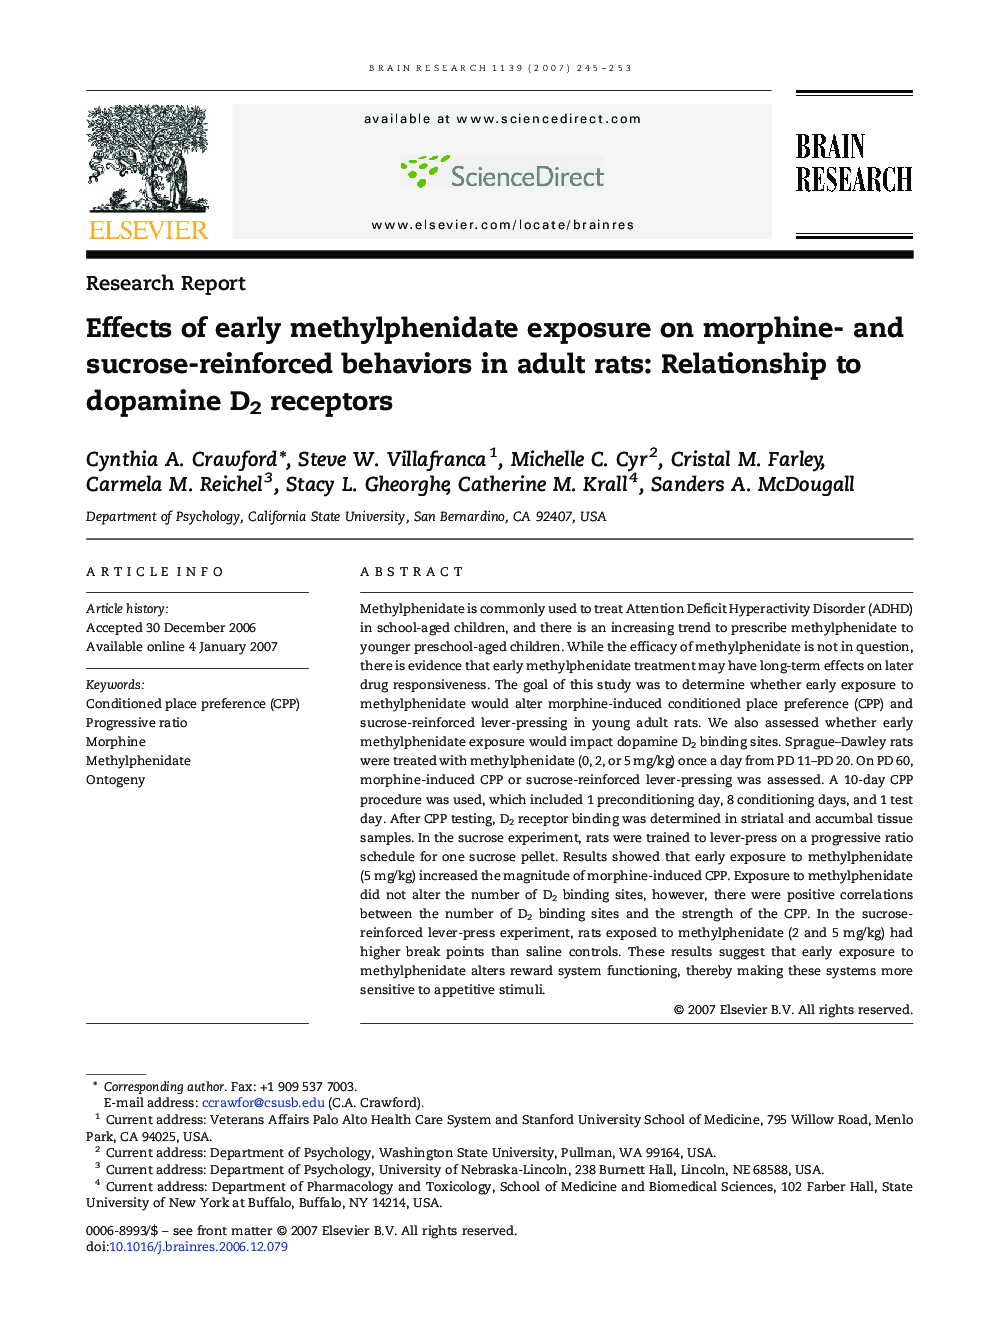 Effects of early methylphenidate exposure on morphine- and sucrose-reinforced behaviors in adult rats: Relationship to dopamine D2 receptors